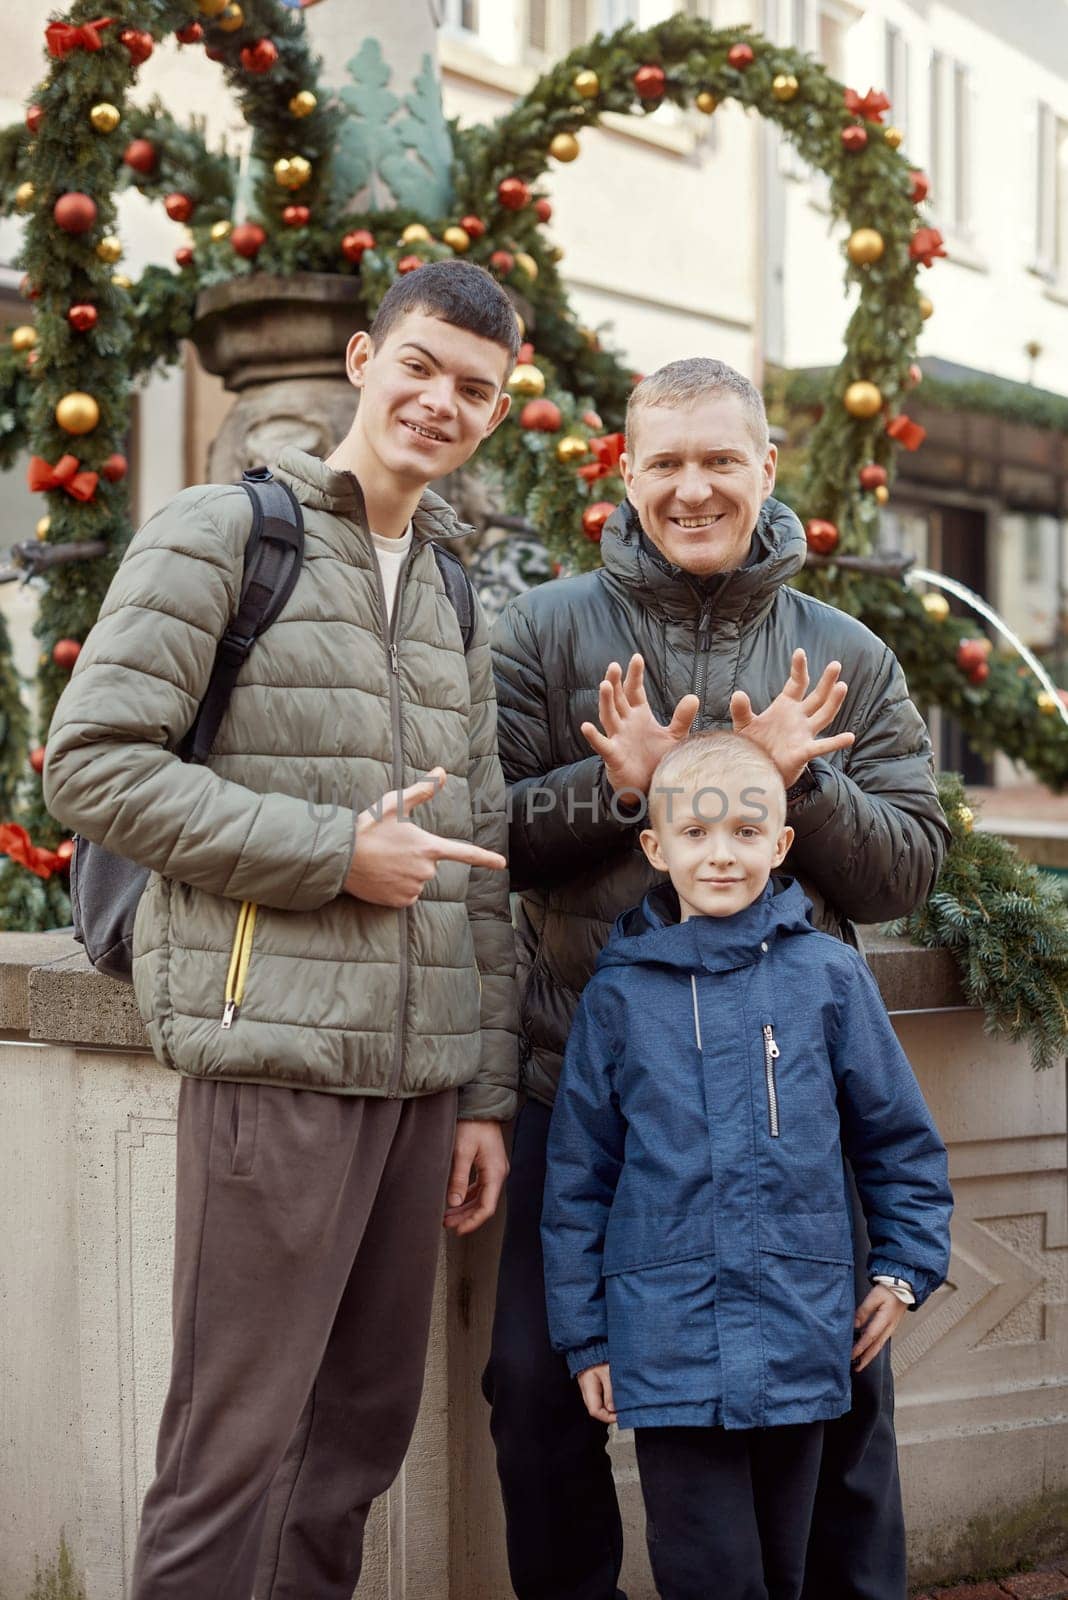 Joyful Family Portrait: Father and Two Sons by Festive Vintage Fountain. Capture the essence of familial happiness with this heartwarming image featuring a handsome father with his two sons standing against the backdrop of a festively decorated vintage fountain. The image beautifully blends the joy of the holiday season with the timeless charm of family togetherness. The father is 44 years old, the elder son is 17, and the younger one is 8, creating a memorable and multigenerational festive scene.